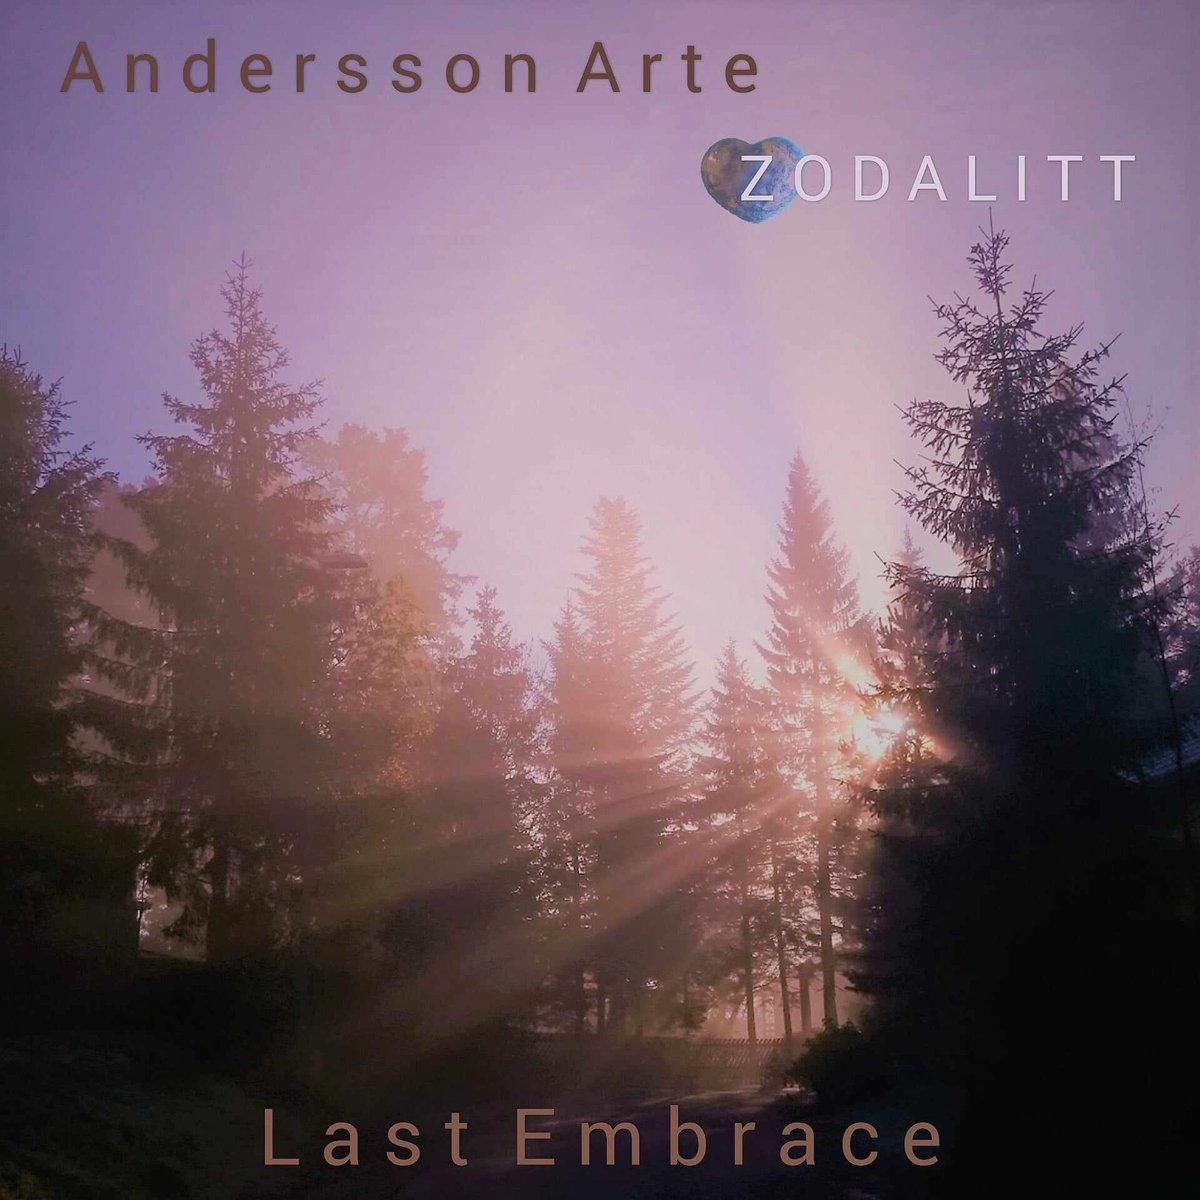 Poem & Music, new release coming soon! Last Embrace is a beautiful poem written by Marty Andersson. I made the music. Will be available on all streaming services 15.03.24 @phucdatrecords #poem #music #soundtrack #piano #heartbreak #longing